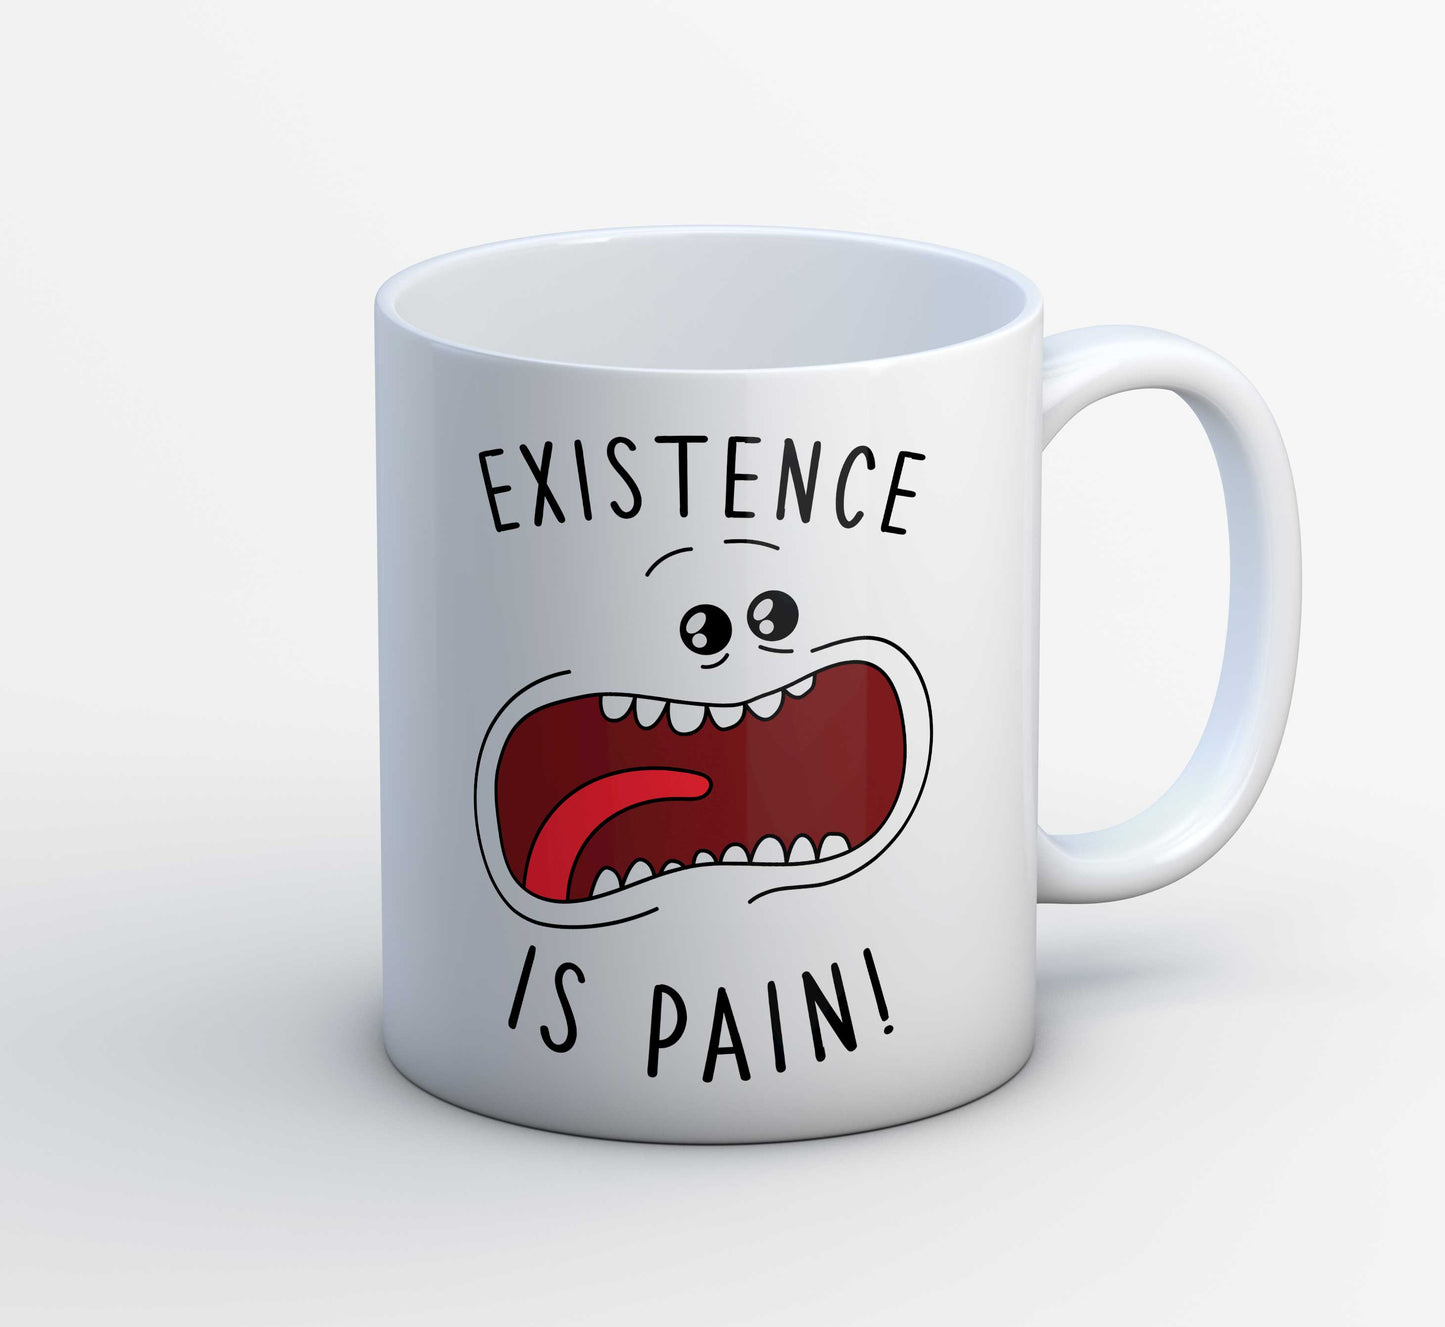 rick and morty existence is pain mug coffee ceramic buy online india the banyan tee tbt men women girls boys unisex  rick and morty online summer beth mr meeseeks jerry quote vector art clothing accessories merchandise